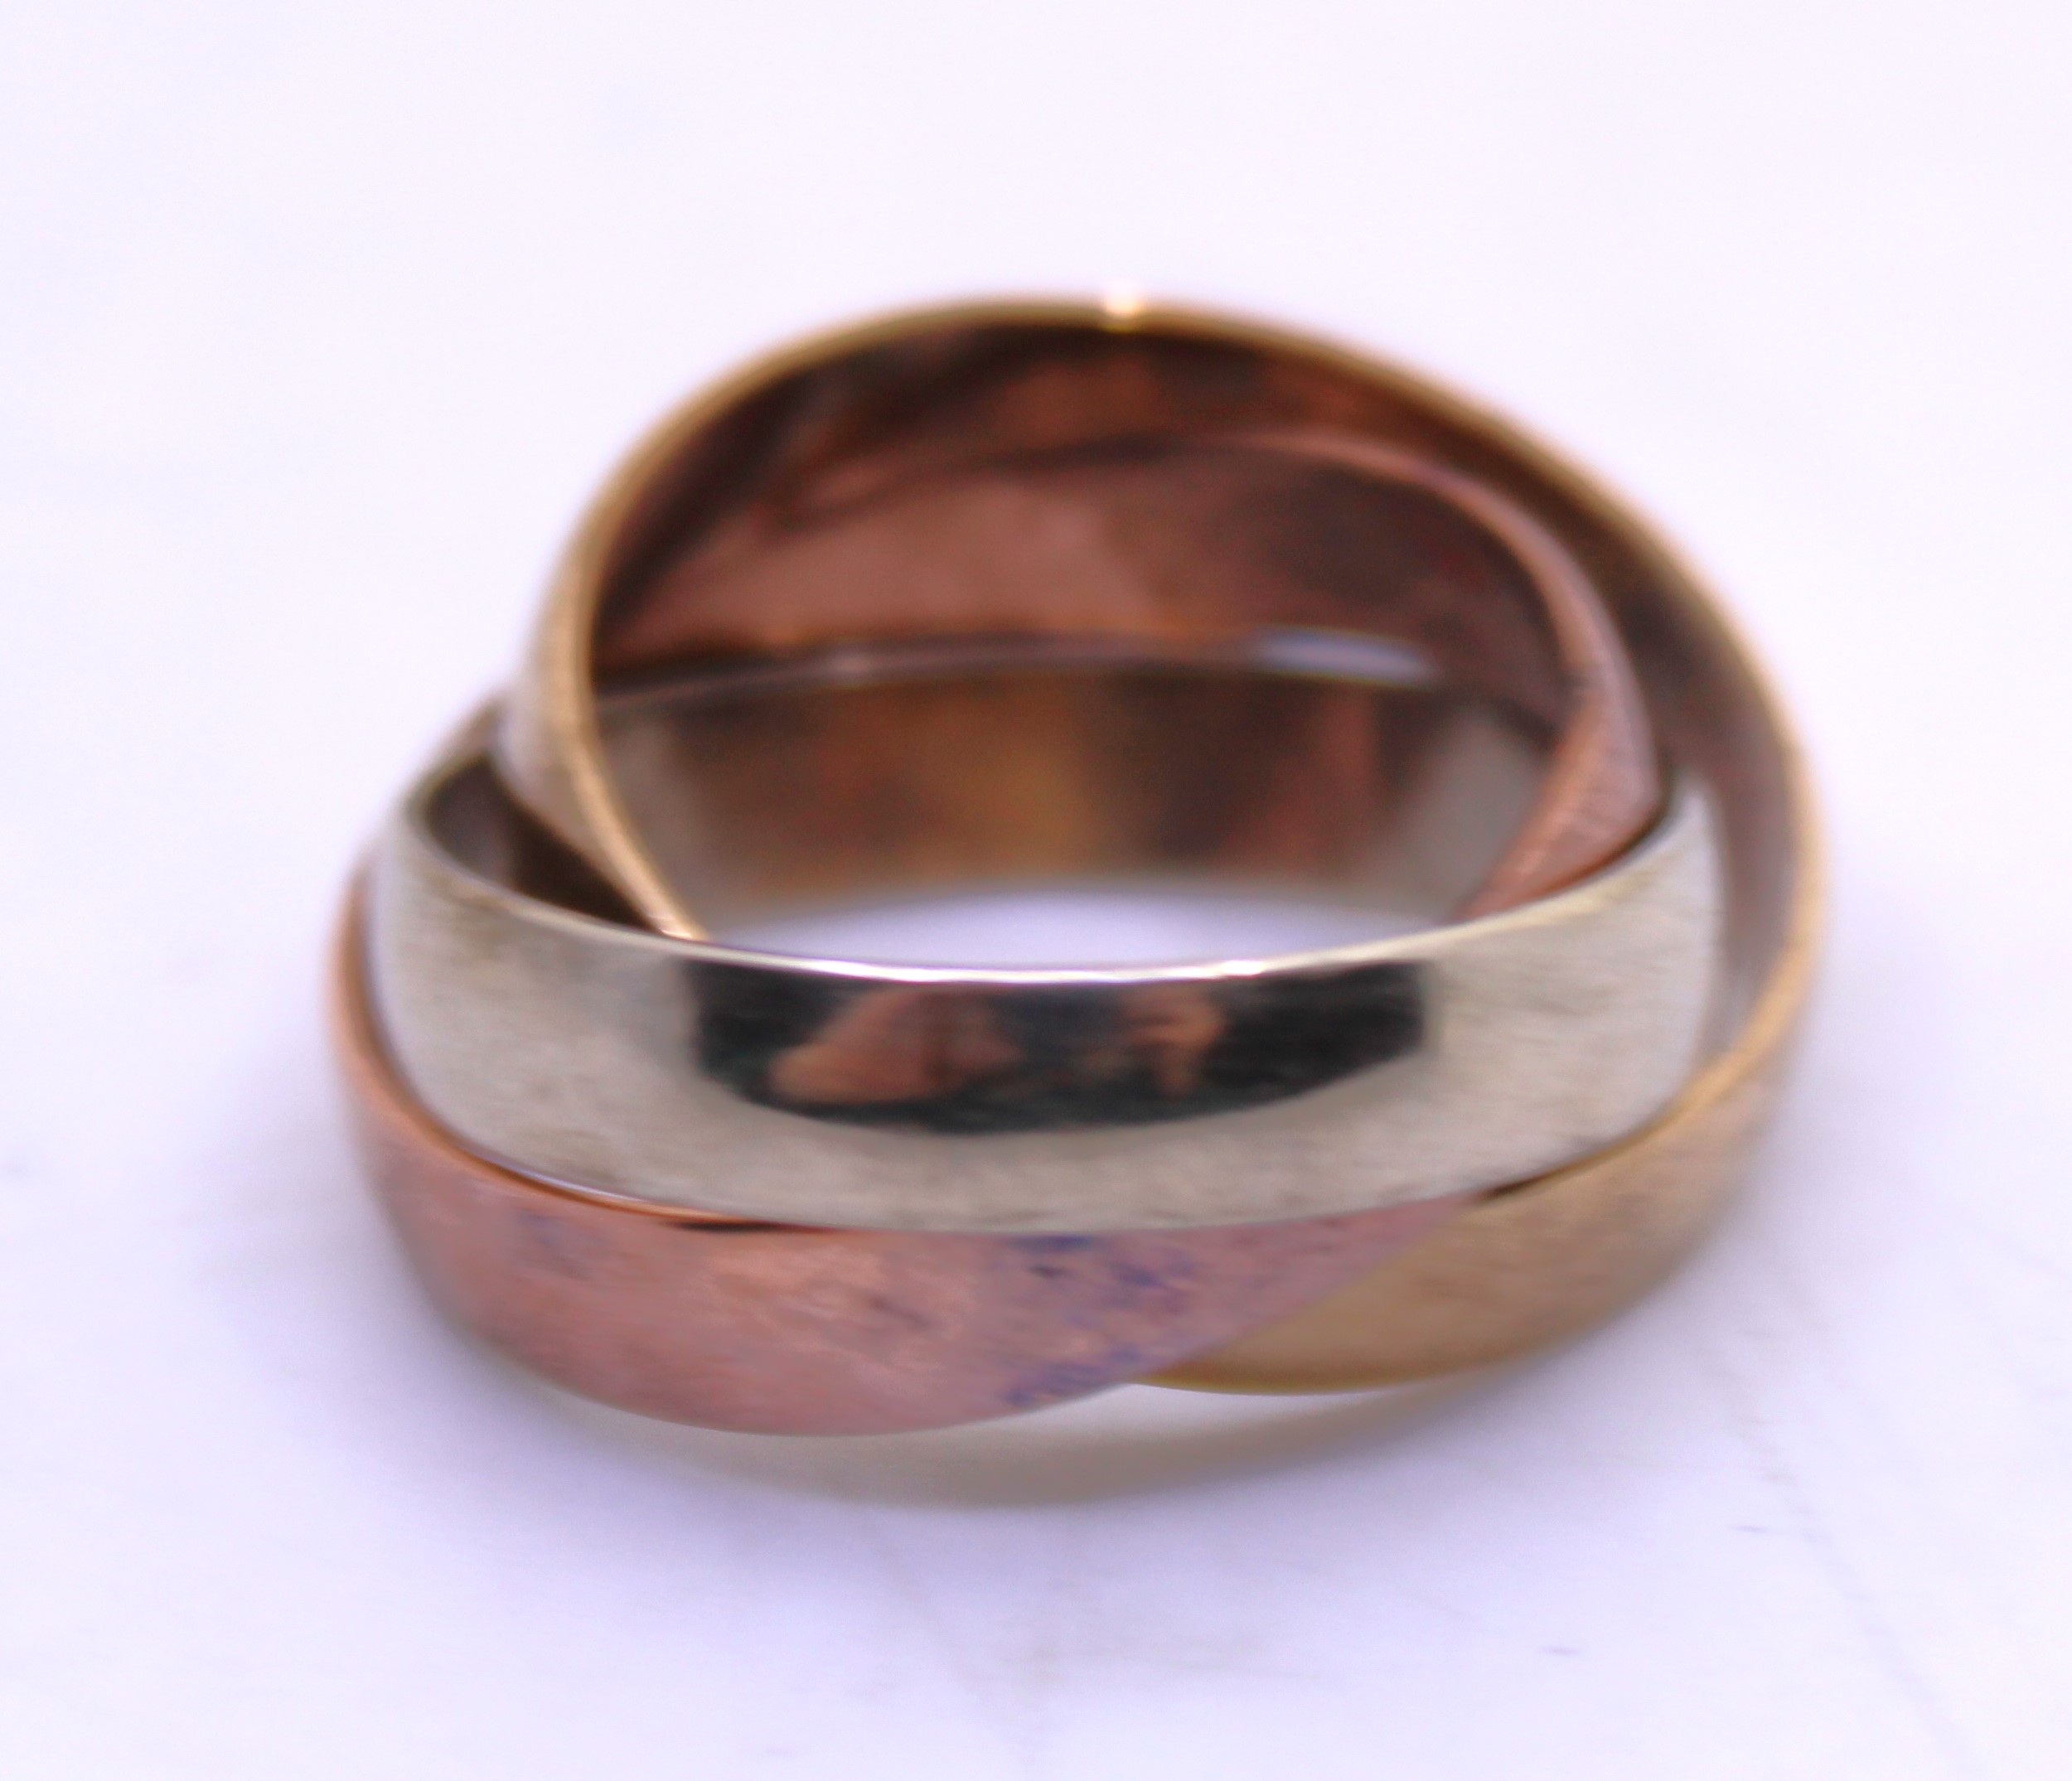 Tri-Coloured 9ct Gold Puzzle Ring.  Consists of a 9ct Rose Gold Band, 9ct Yellow Gold Band and 9ct - Image 2 of 2